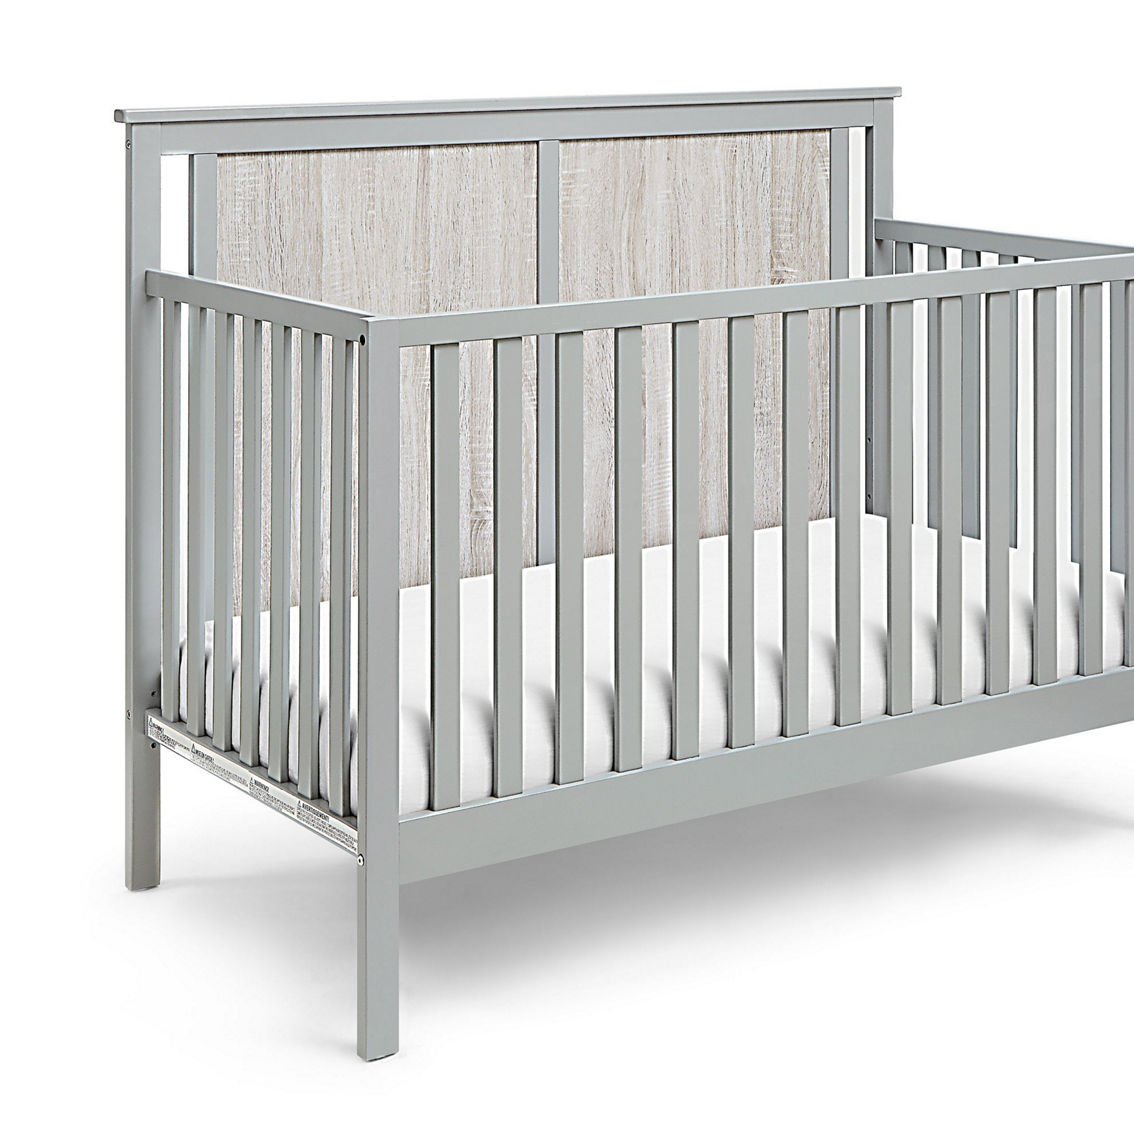 Suite Bebe Connelly 4-in-1 Convertible Crib Gray/Rockport Gray - Image 2 of 5